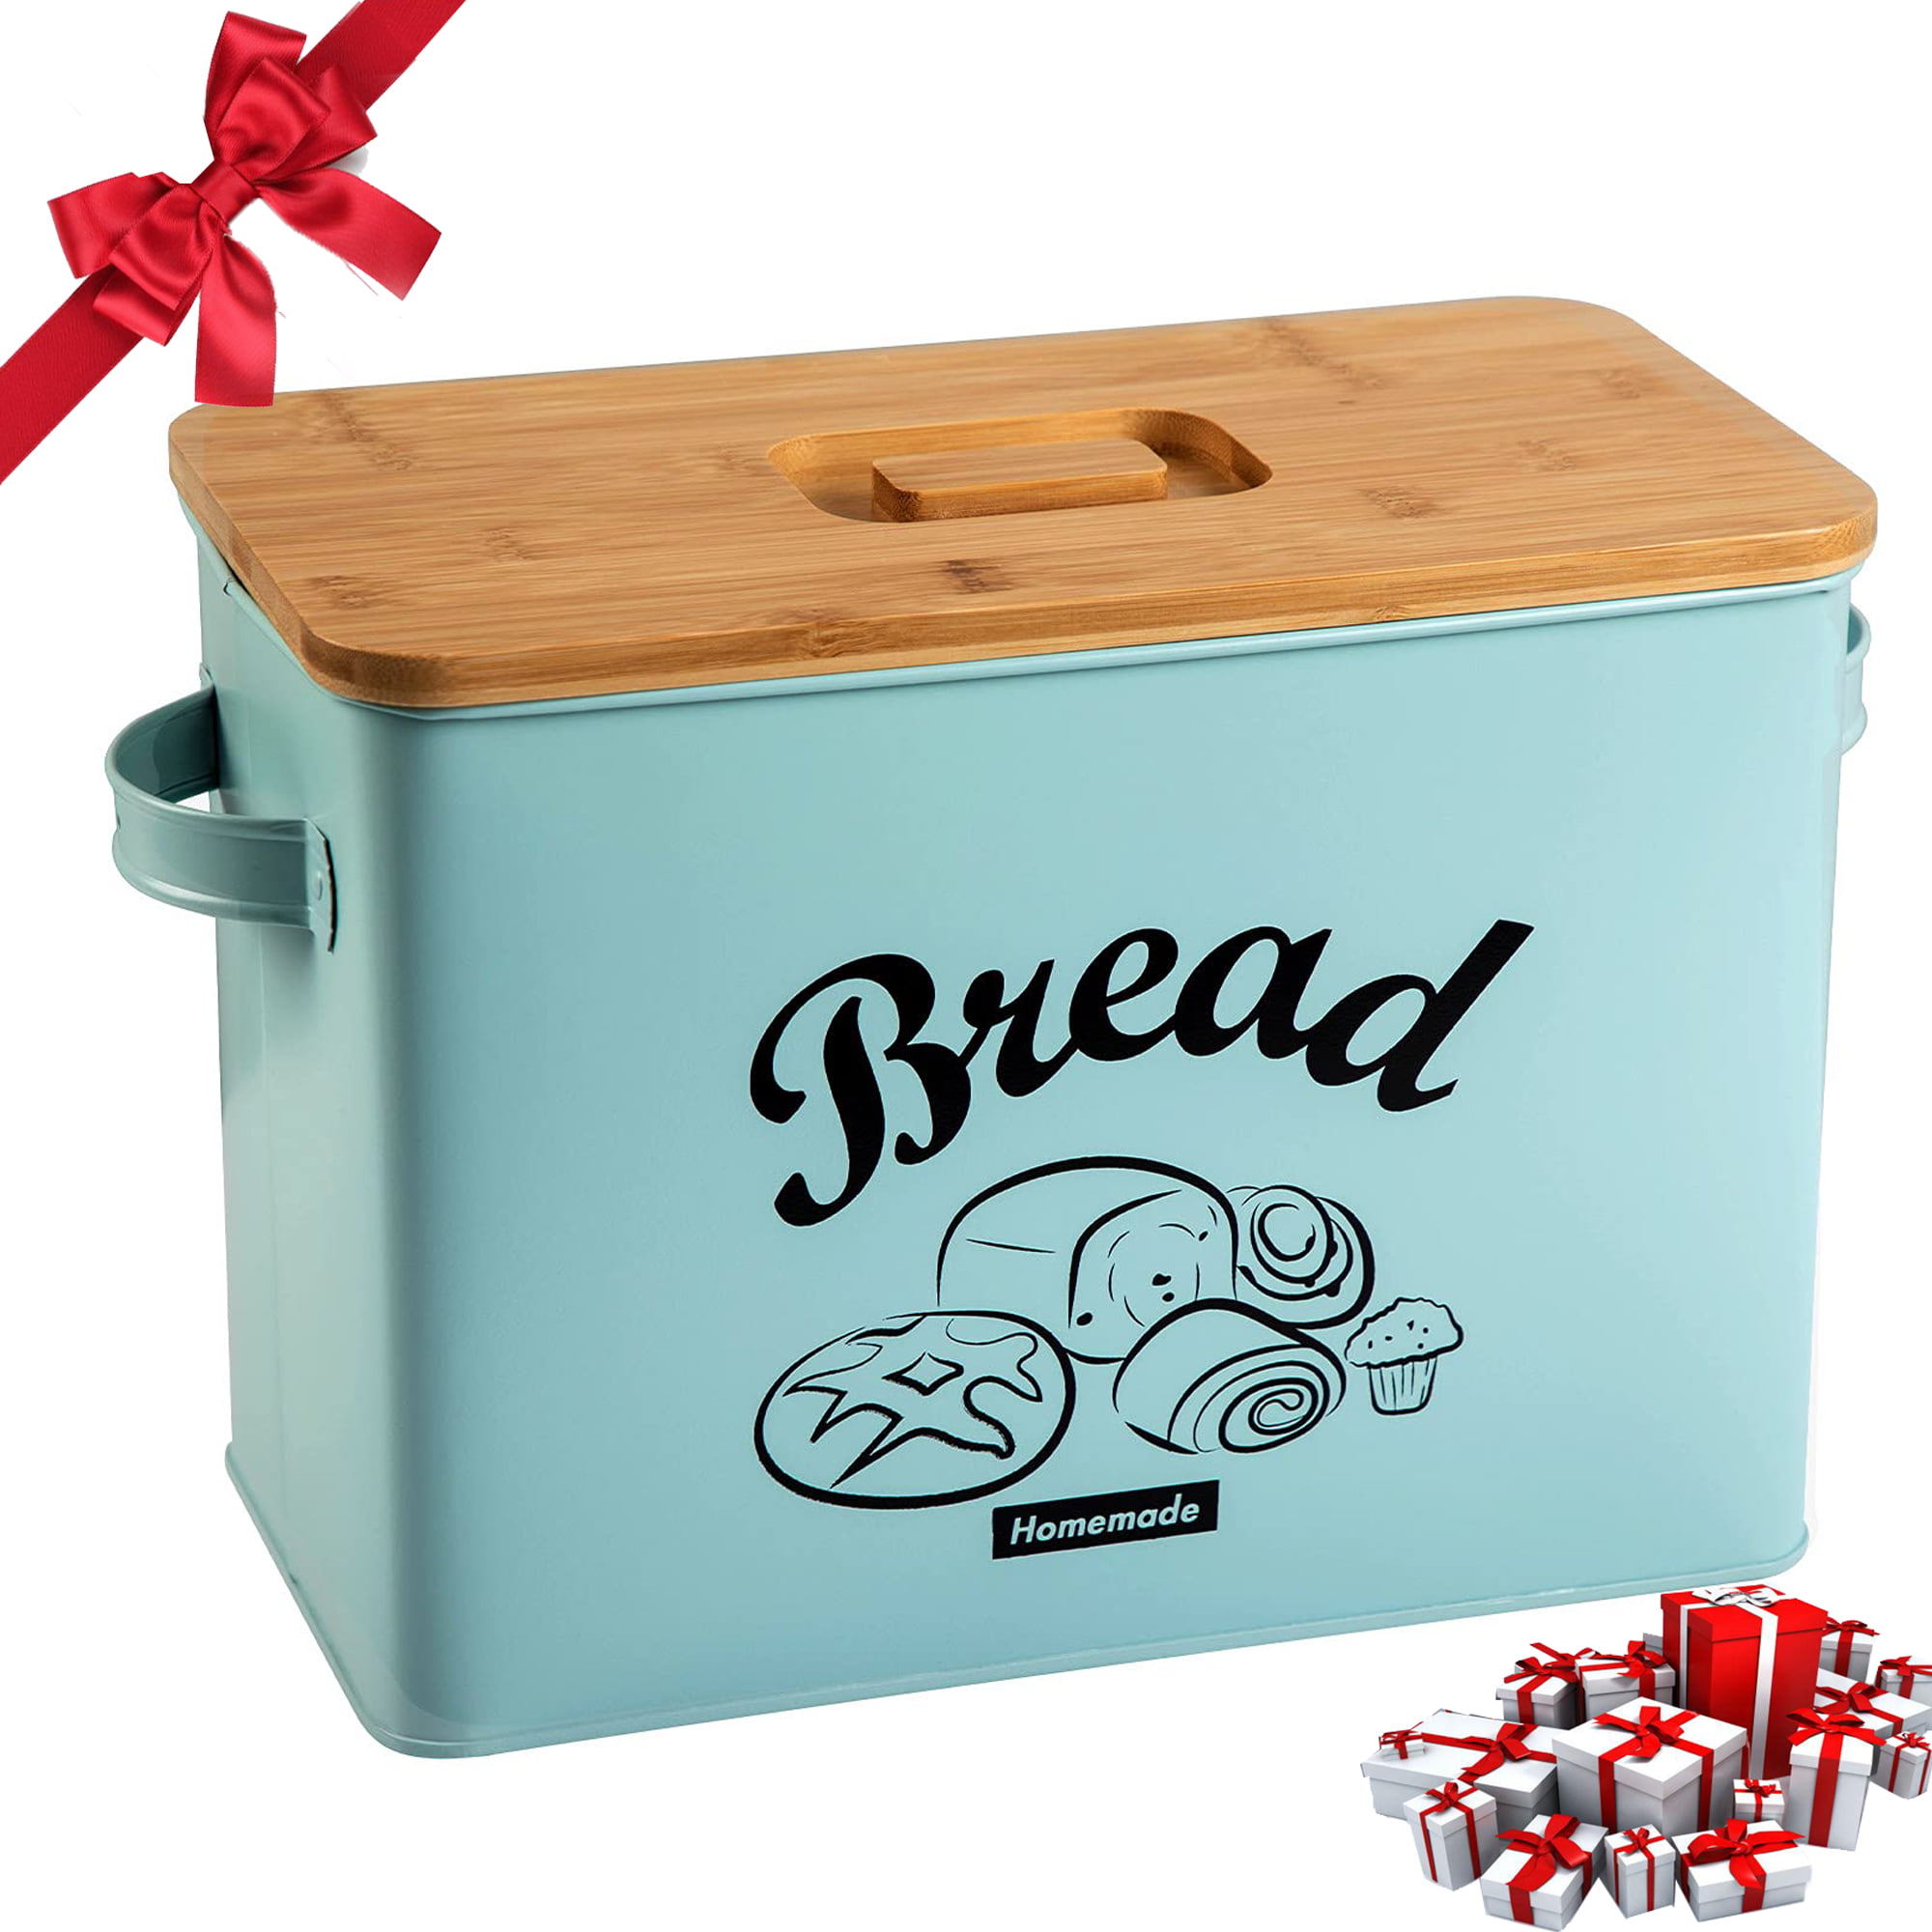 2 Compartment Large Bread Bin by verygoodbuys